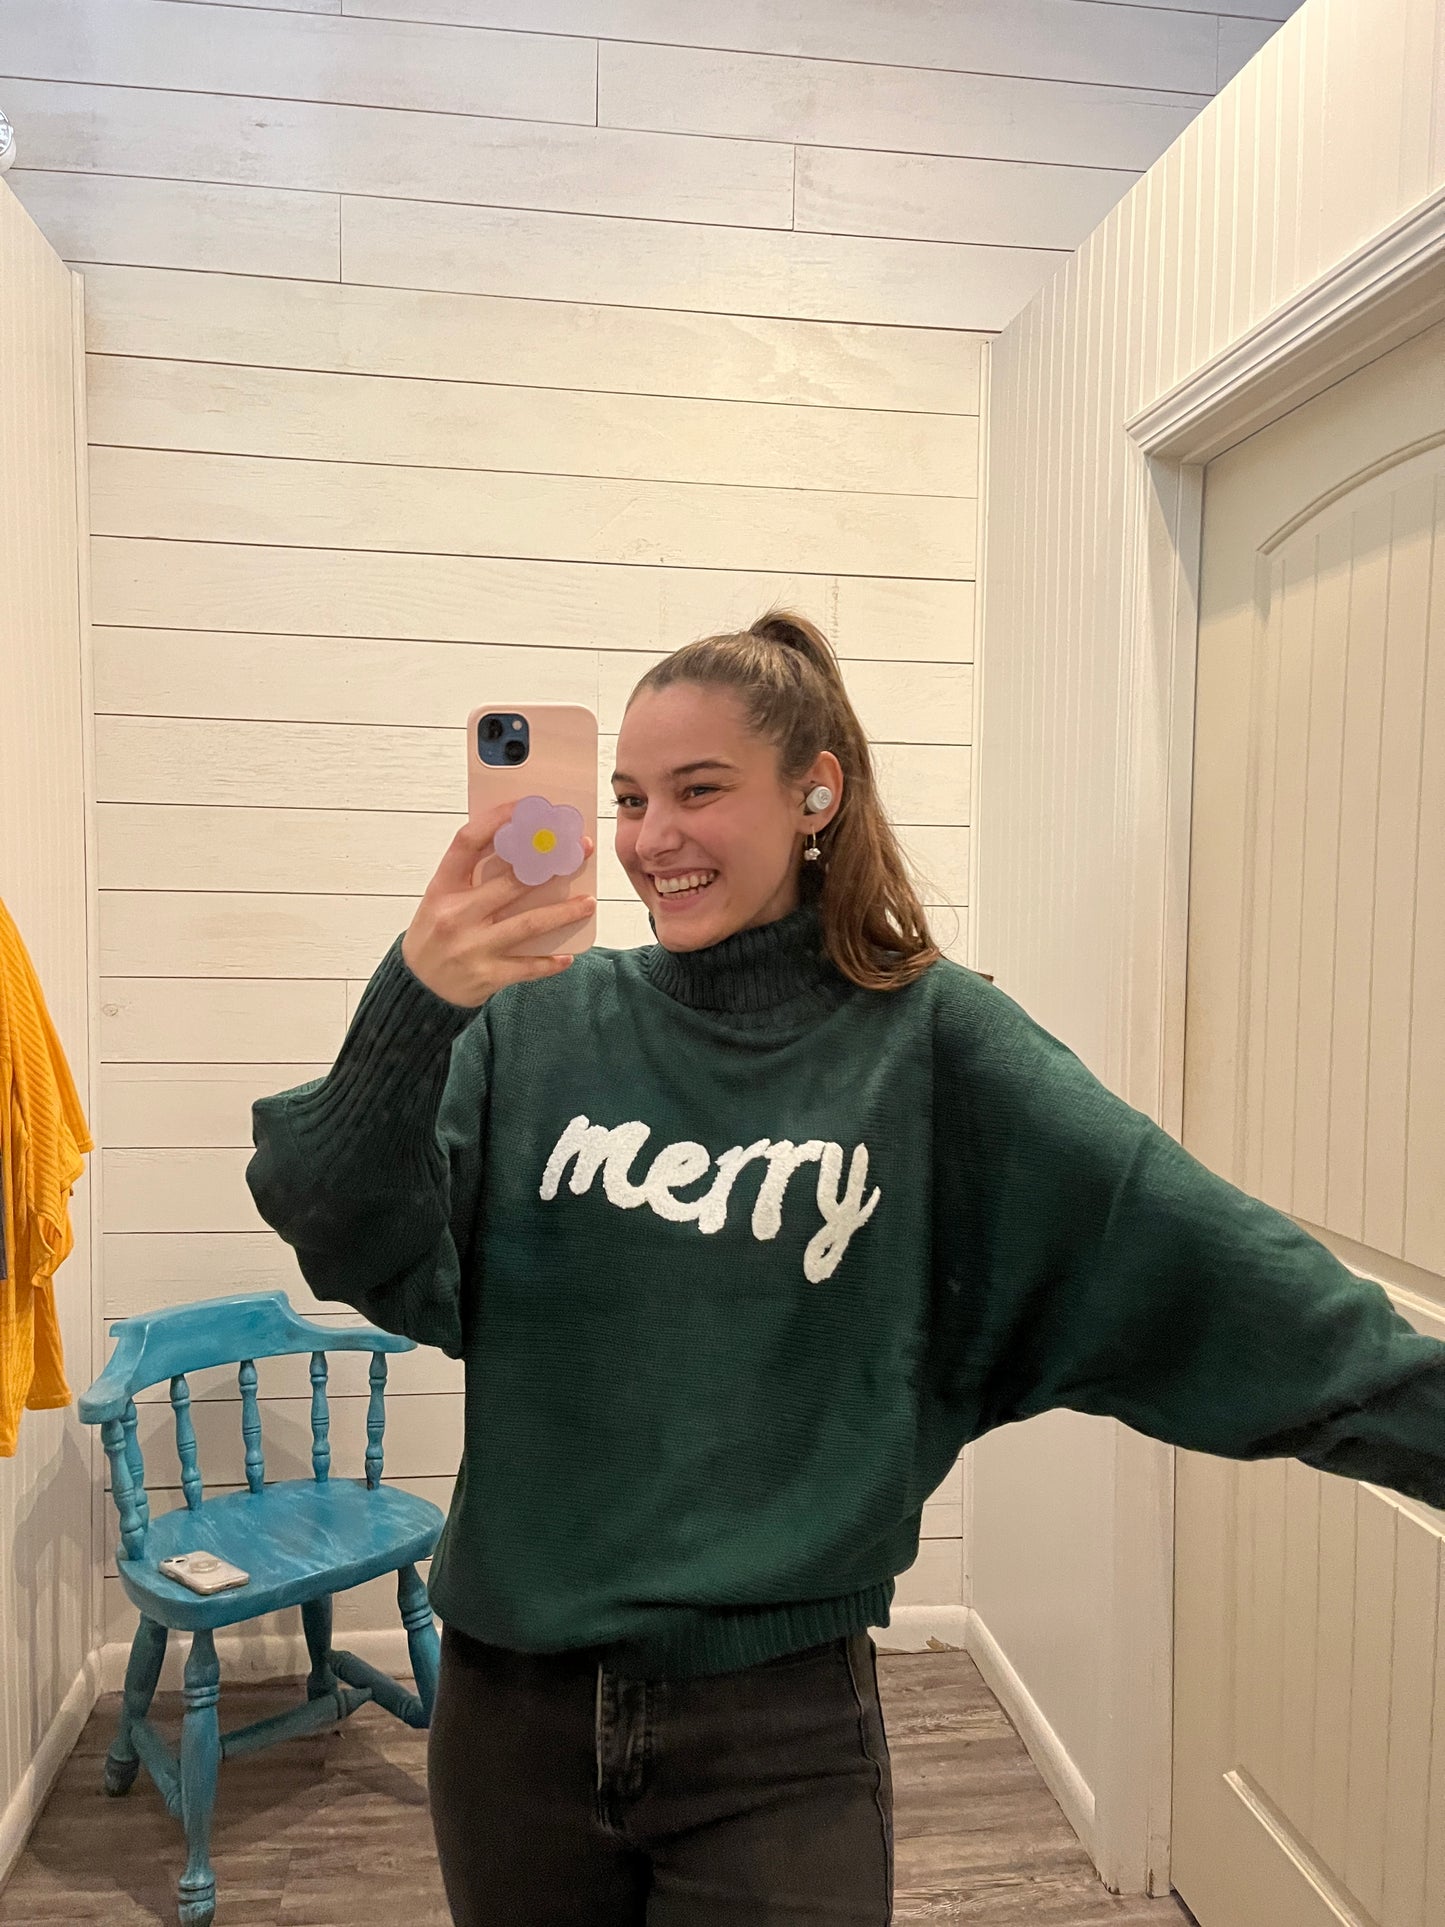 "Merry" Embroidered Turtleneck Sweater